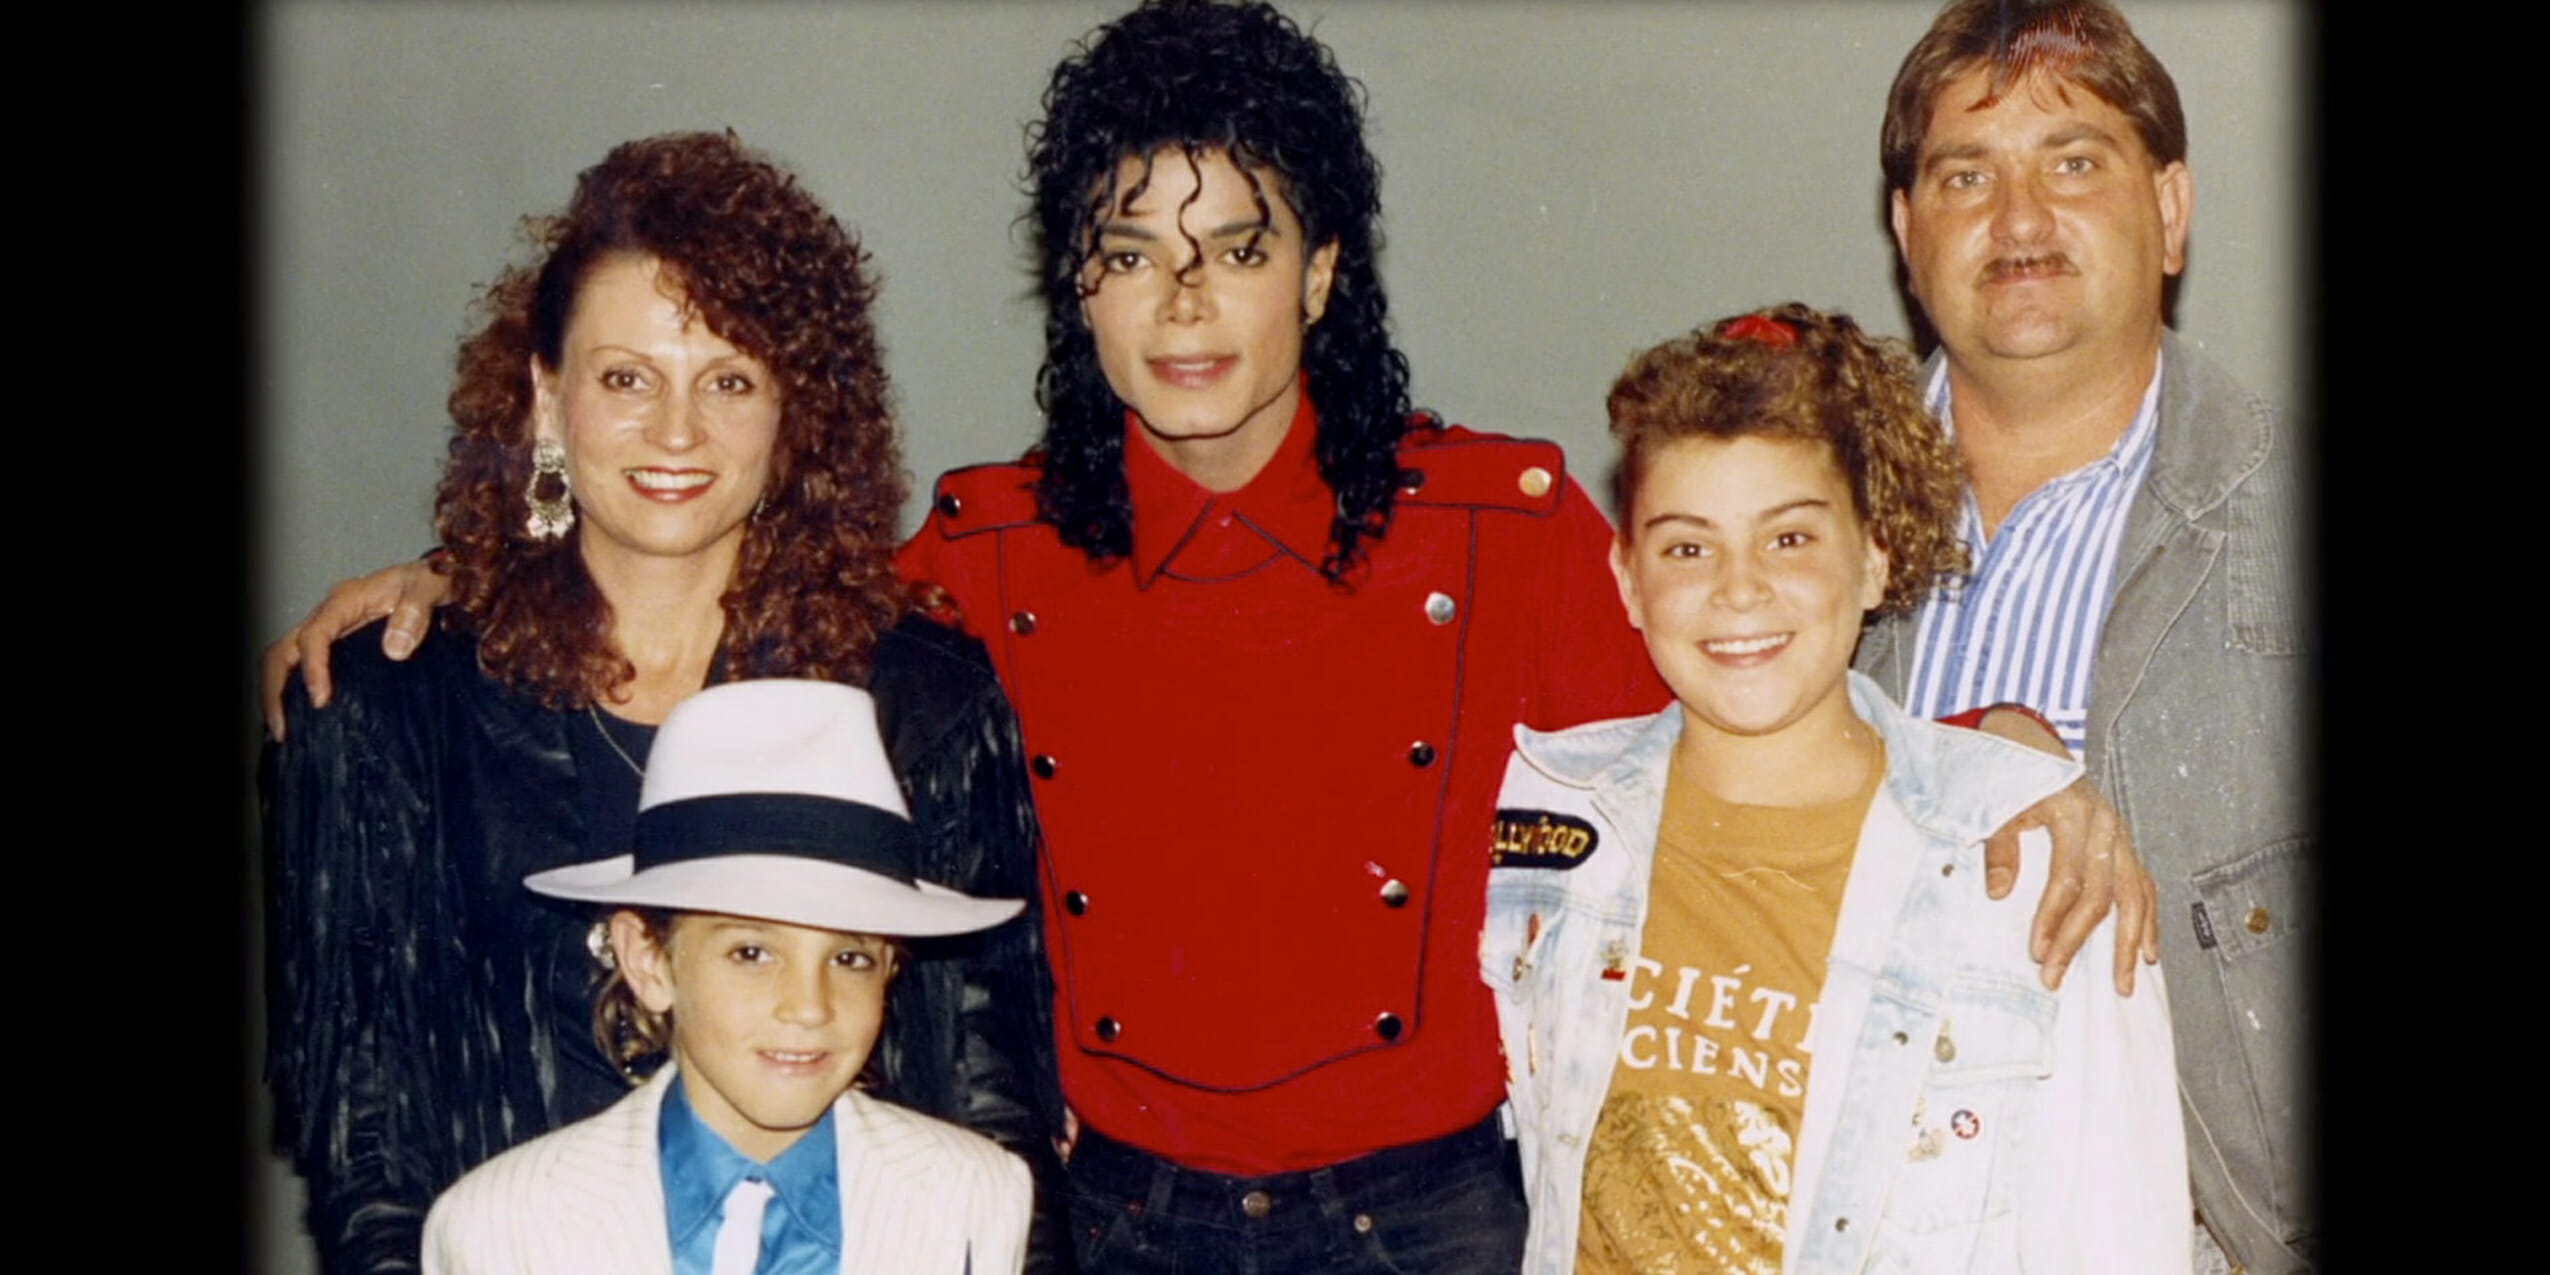 watch leaving neverland documentary online free